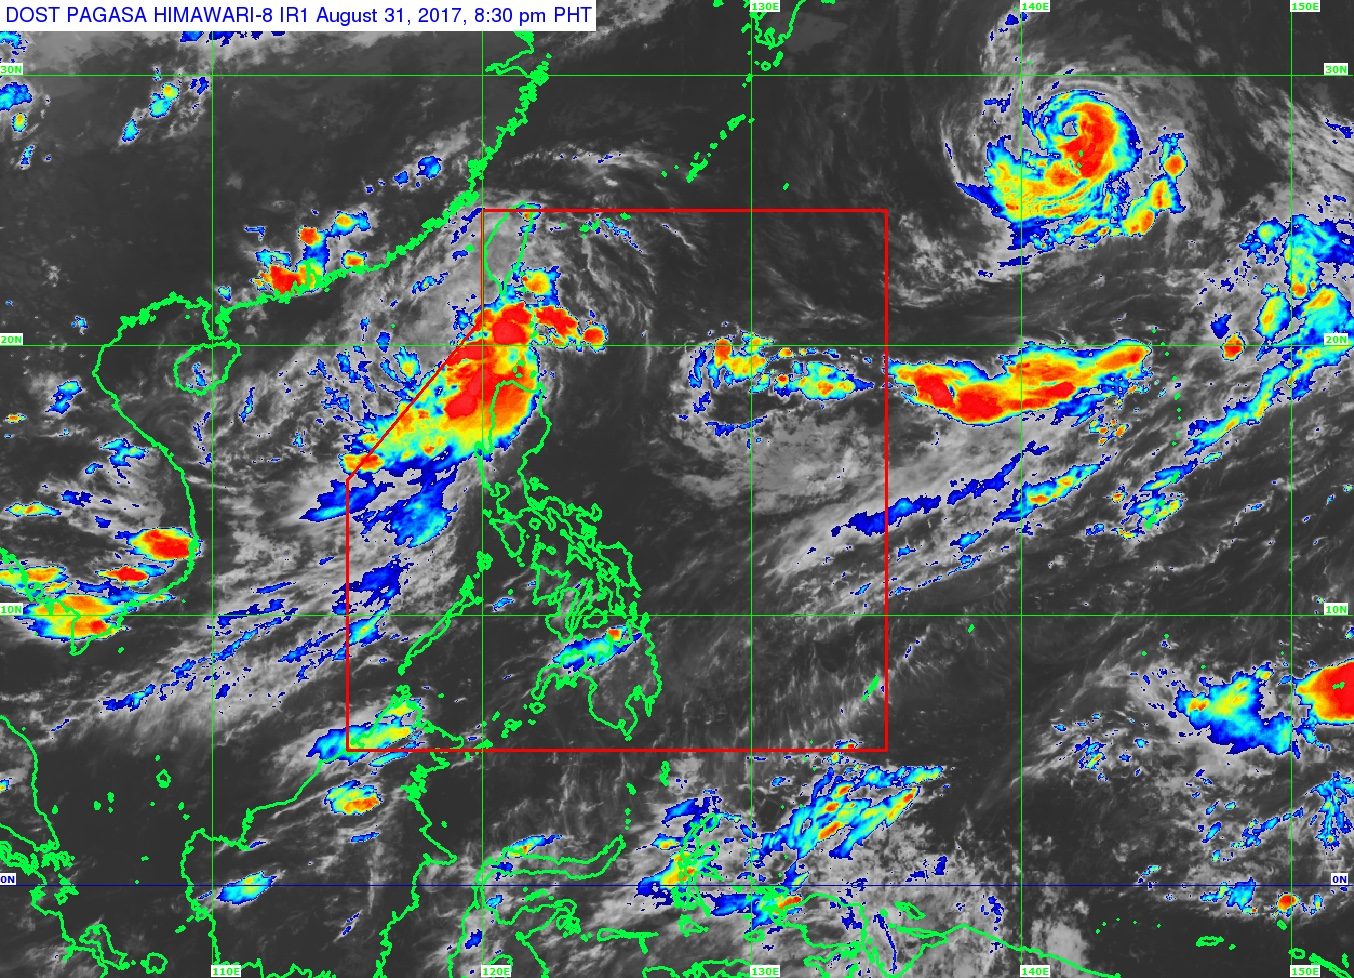 Moderate-heavy monsoon rain in parts of Luzon on Friday